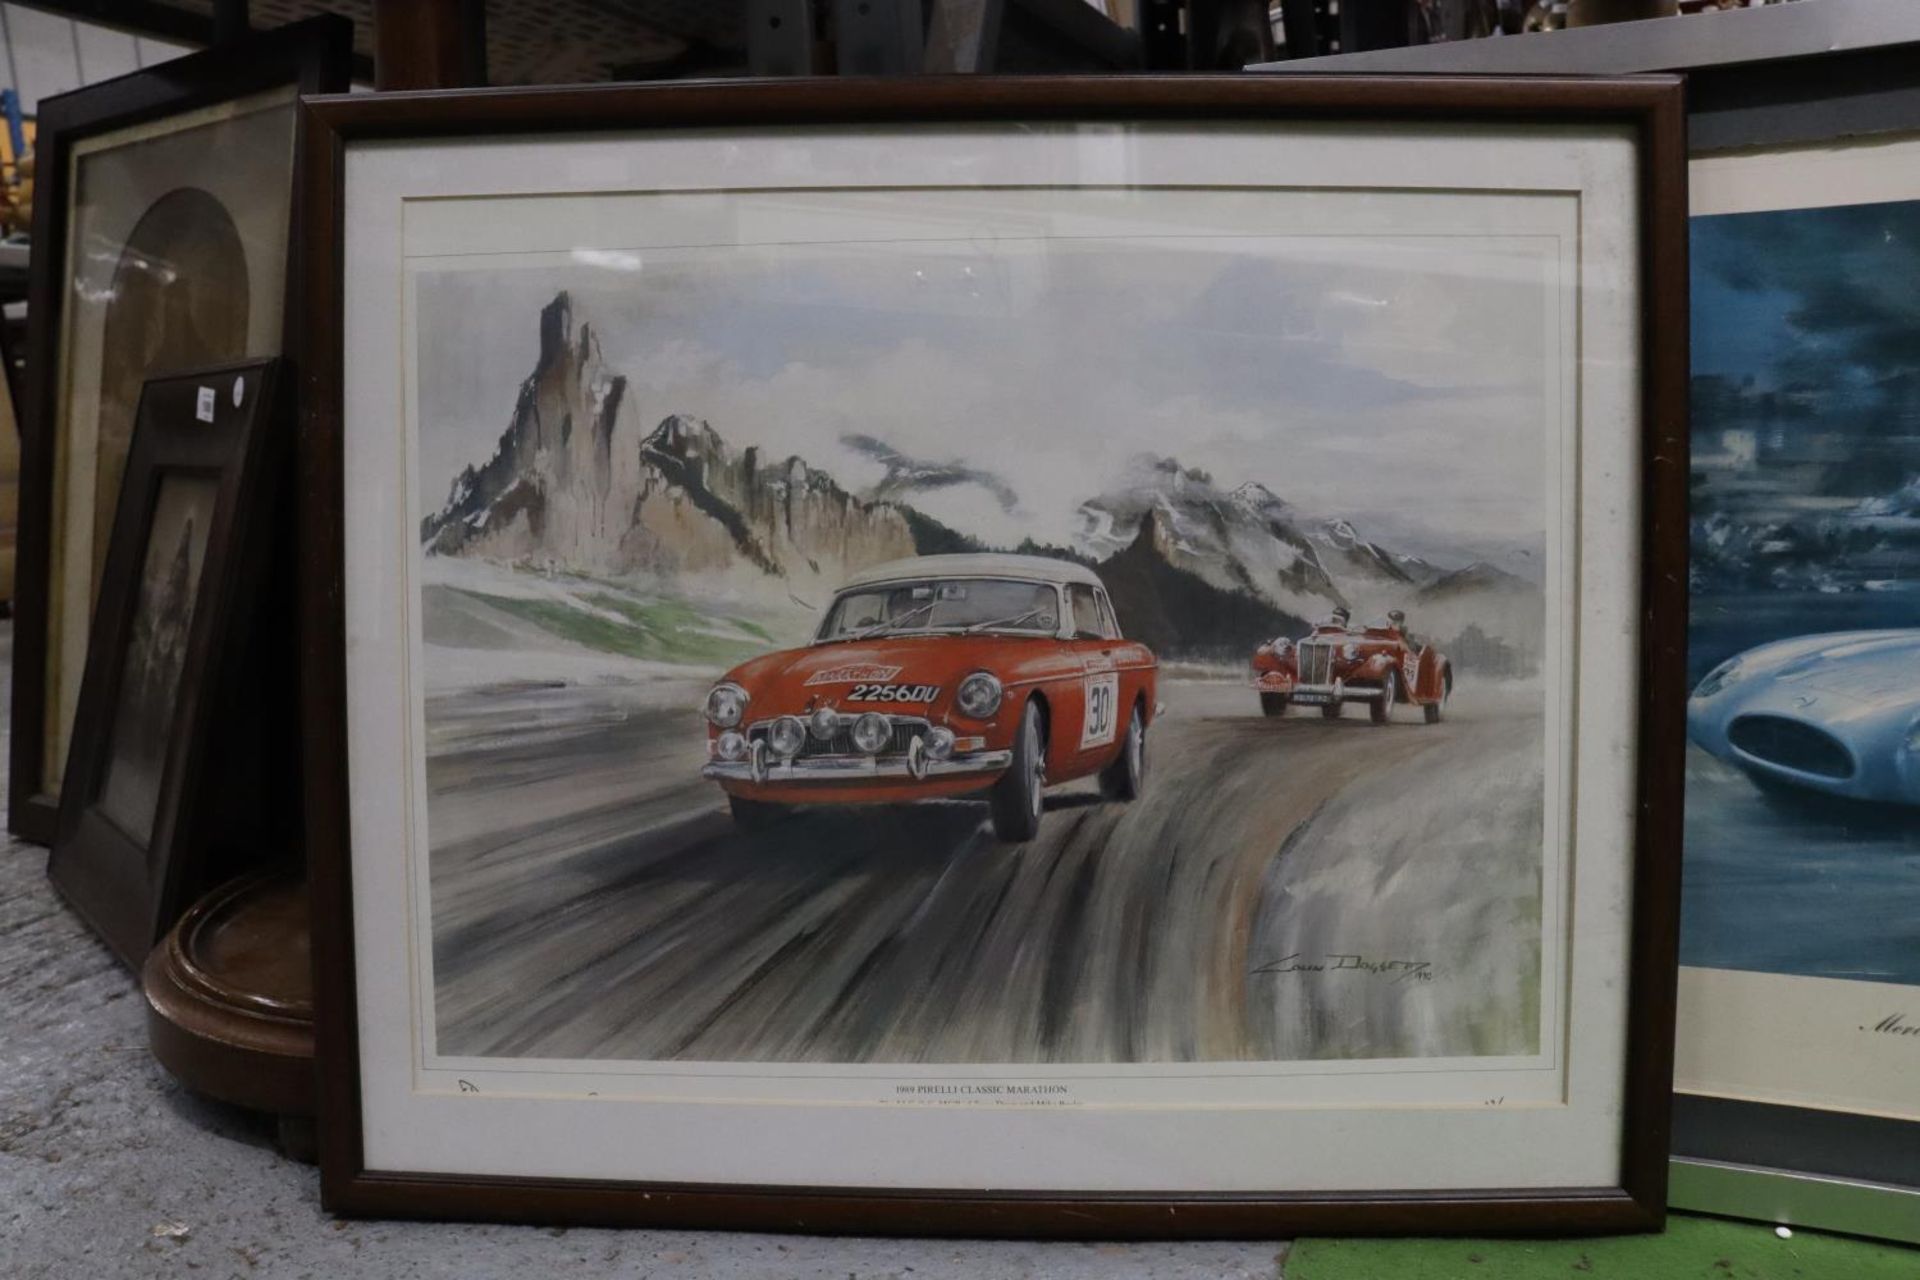 THREE FRAMED PRINTS OF CLASSIC RACING CARS, TO INCLUDE MGA 2 SEATER, 1989 PIRELLI CLASSIC MARATHON - Image 3 of 4